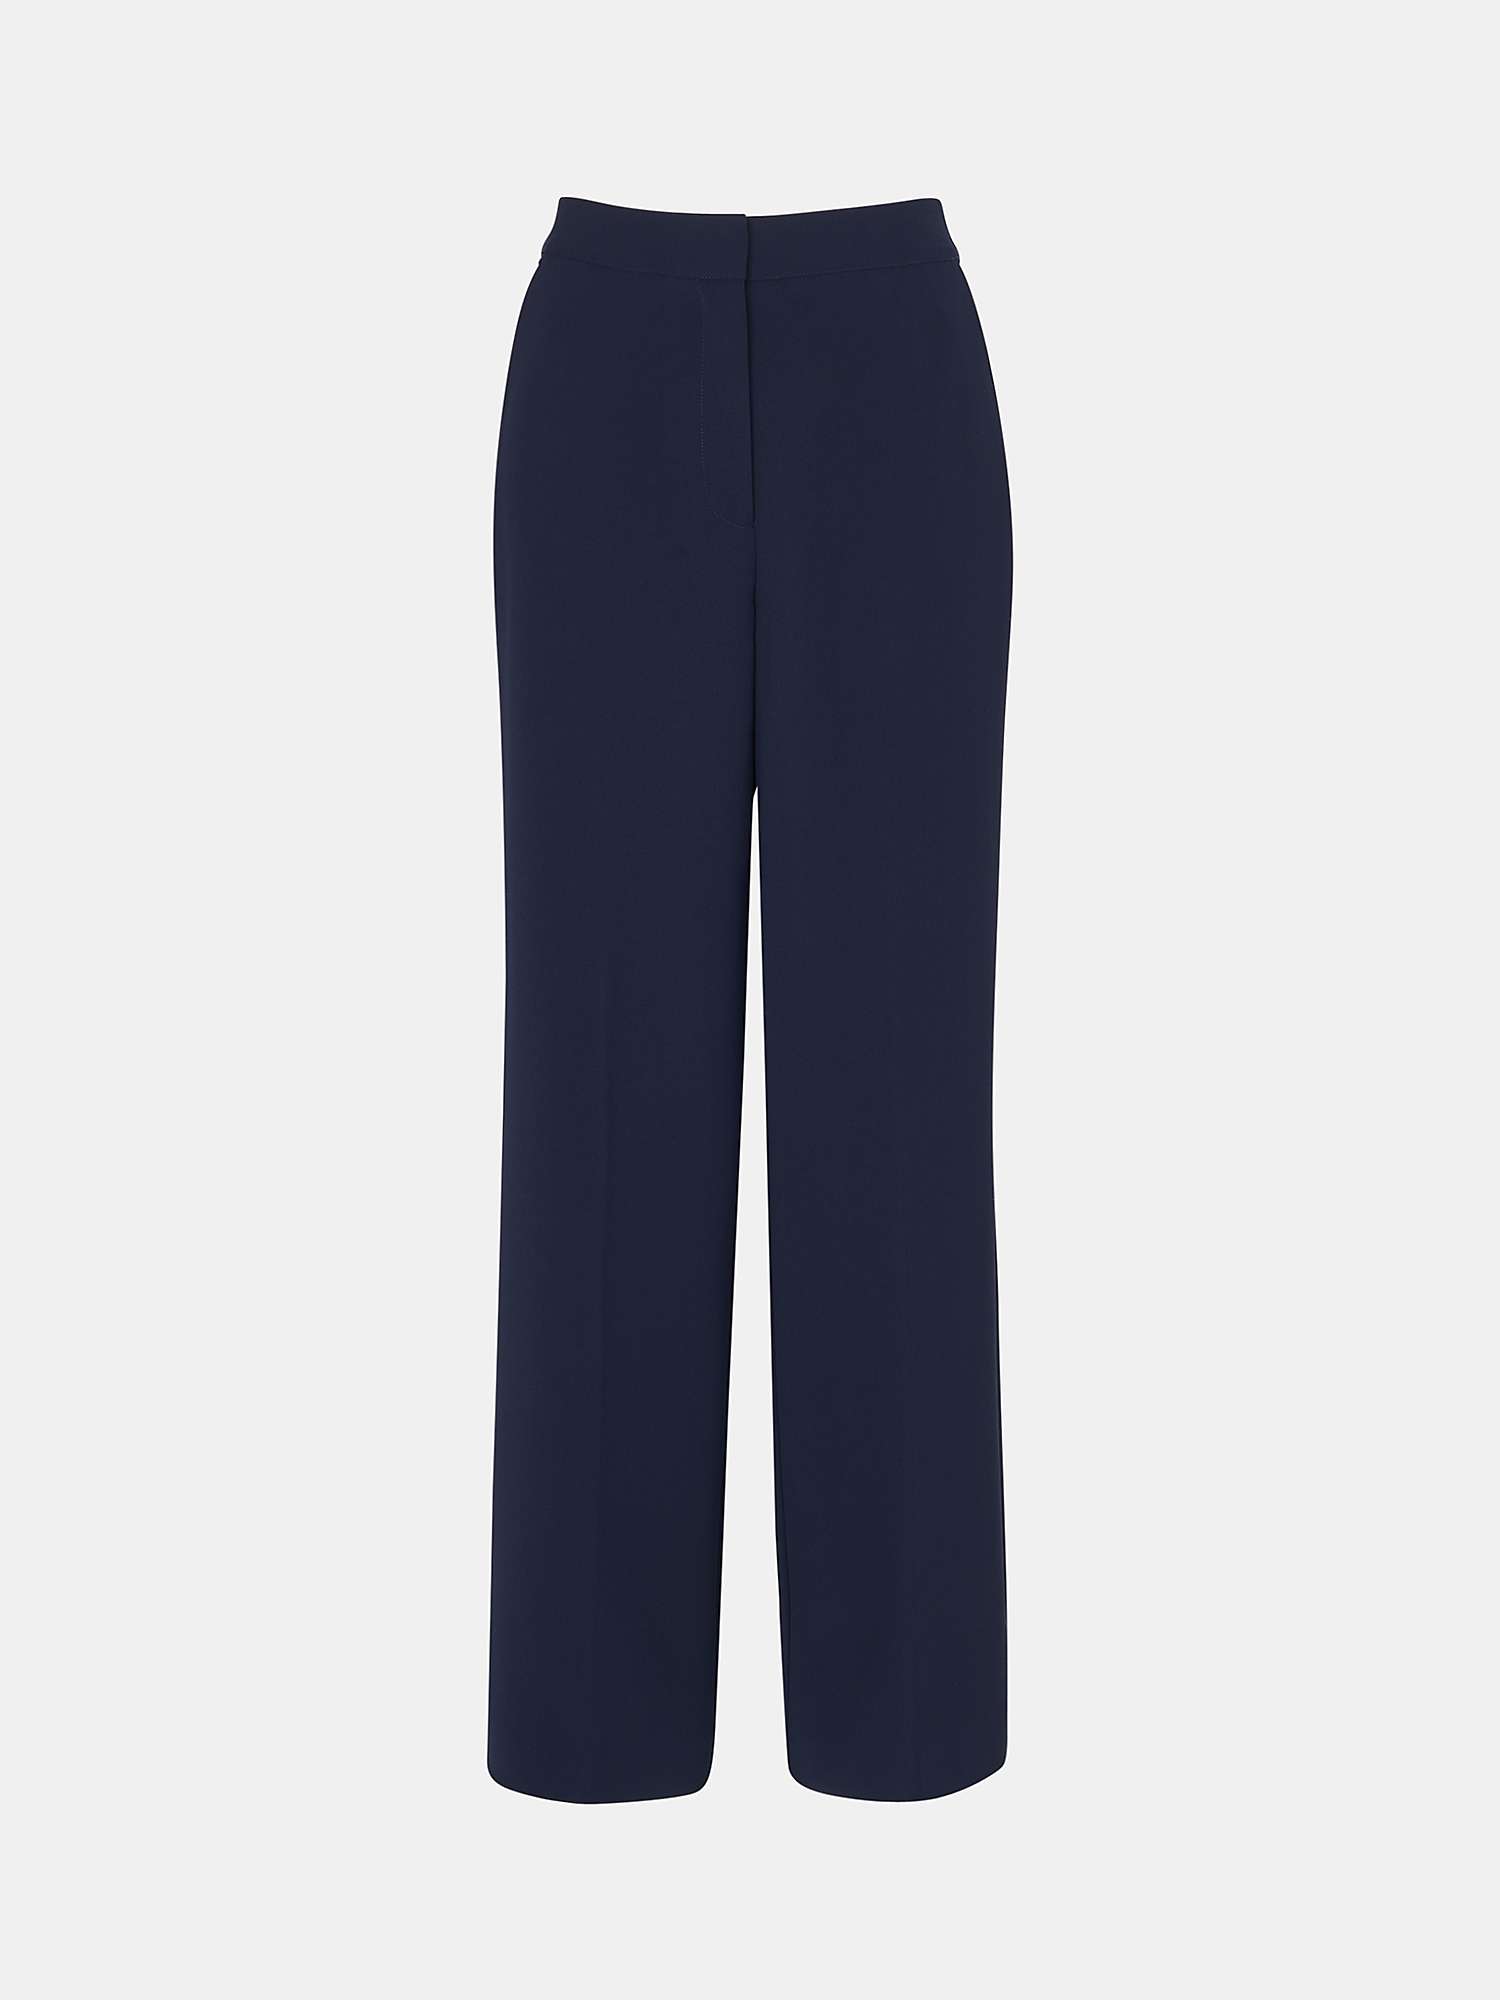 Buy Whistles Ultimate Full Length Trousers, Navy Online at johnlewis.com